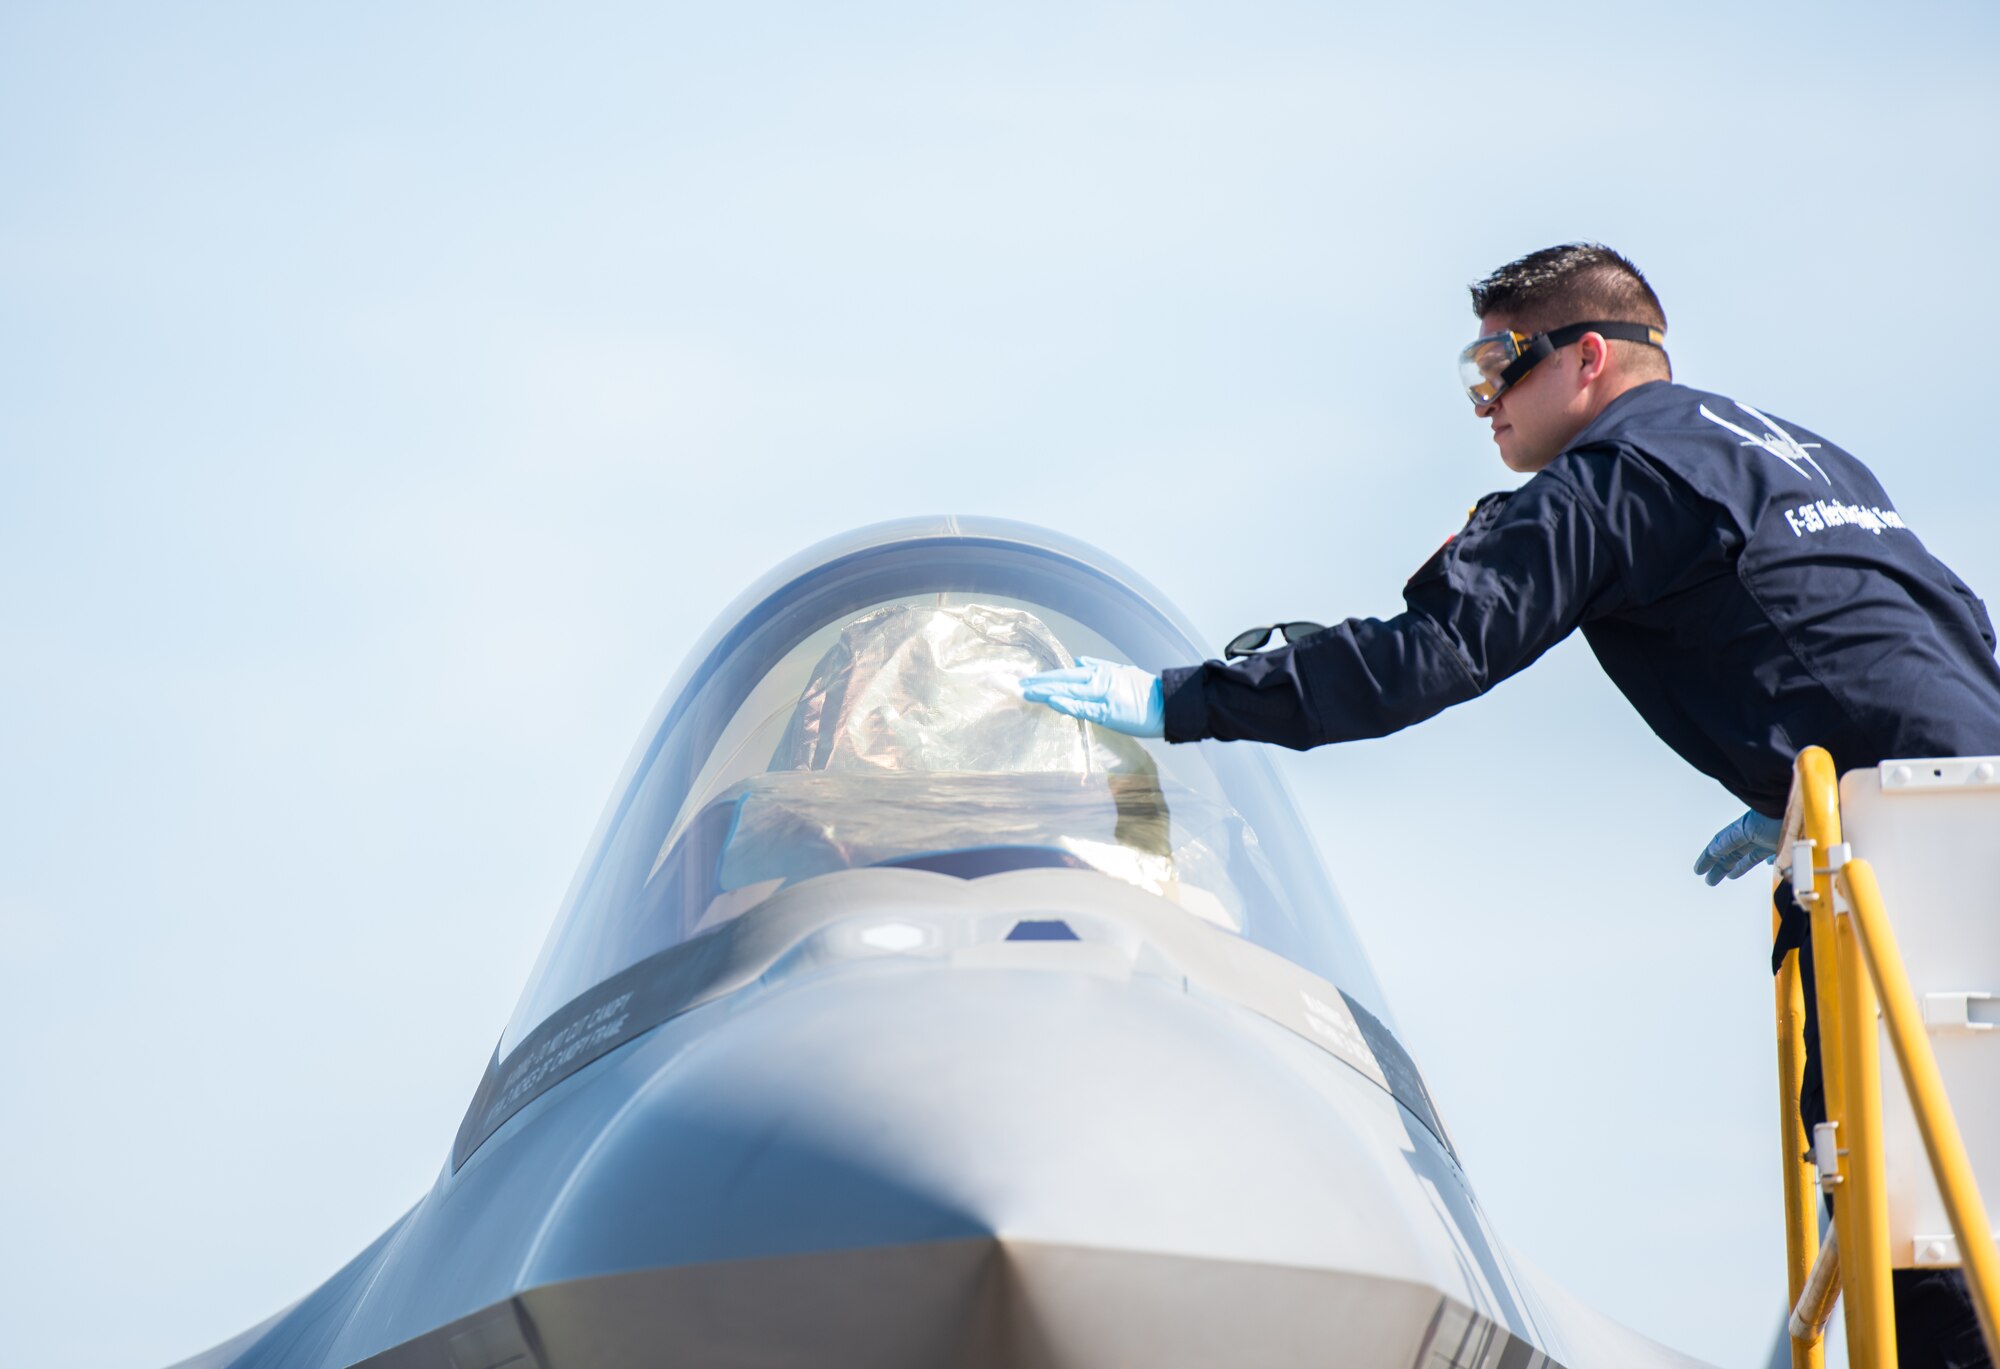 Staff Sgt. John Baker, F-35 Heritage Flight Team crew chief cleans the canopy of an F-35A Lightning II during the Wings Over South Texas air show at Naval Air Station Kingsville, Texas, March 25, 2018. The F-35 HFT consists of one pilot and 12 maintainers who seamlessly work together to maintain the world’s most technologically advanced fighter aircraft. (U.S. Air Force photo by Airman 1st Class Alexander Cook)